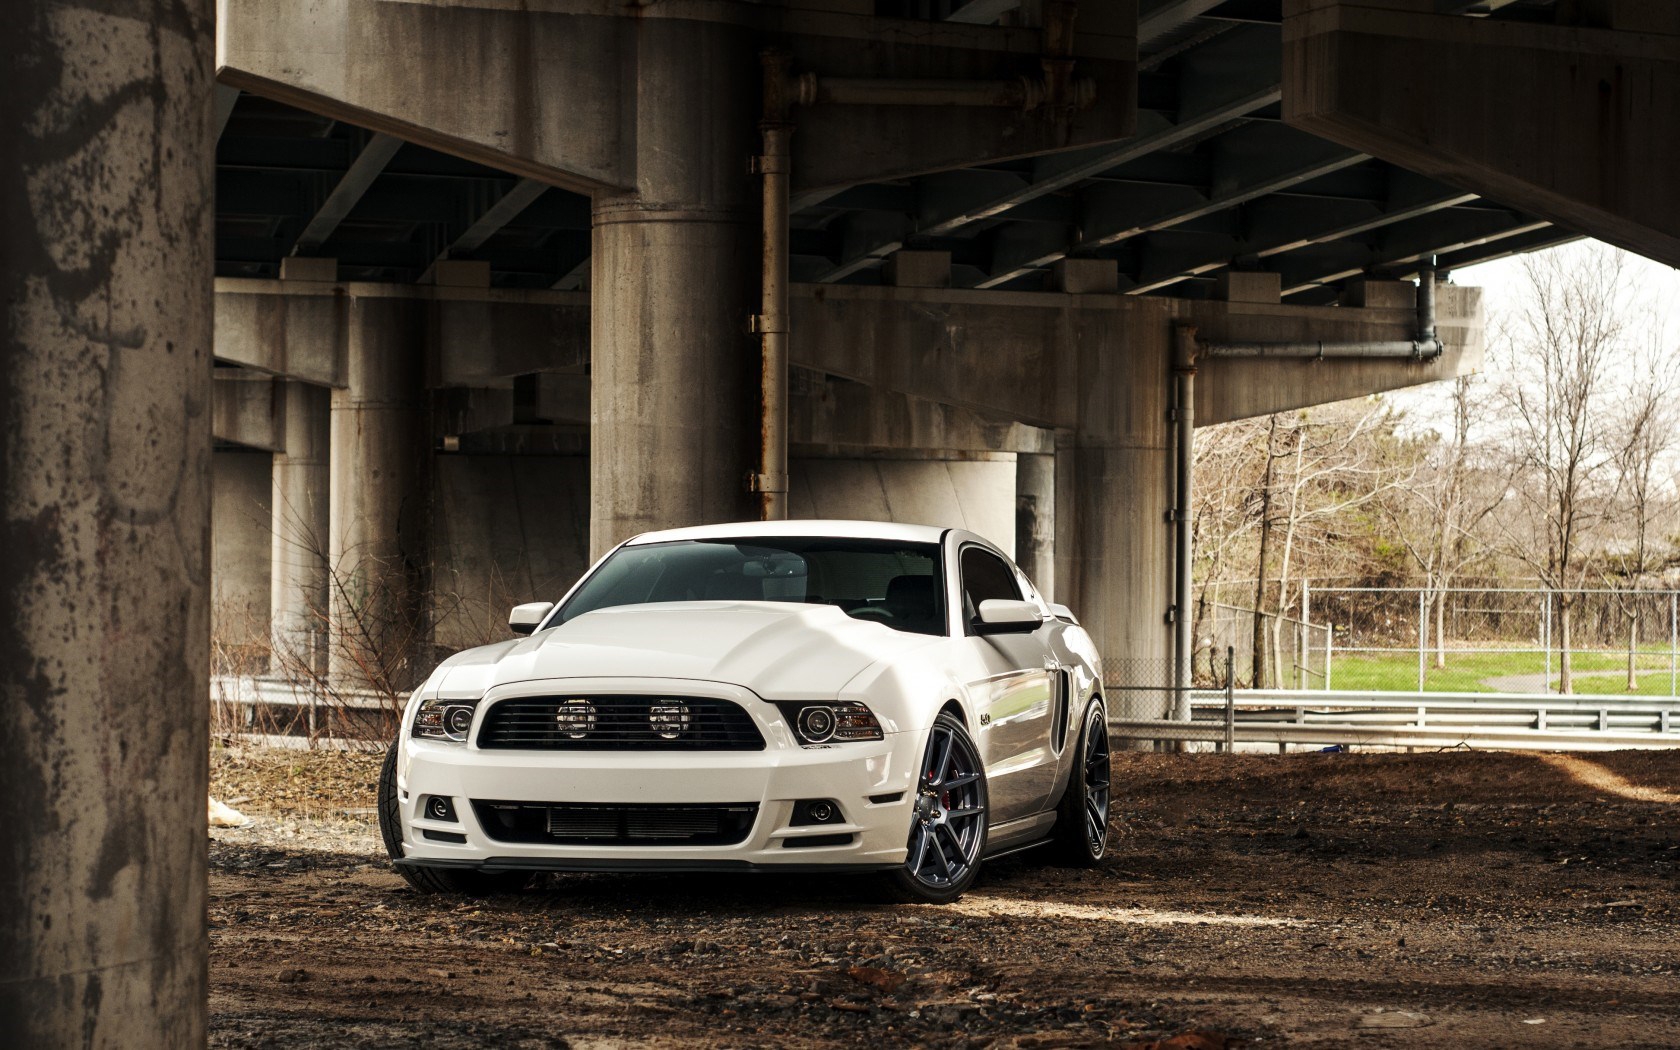 509575 1920x1080 Ford Mustang Ford Need For Speed wallpaper JPG  Rare  Gallery HD Wallpapers